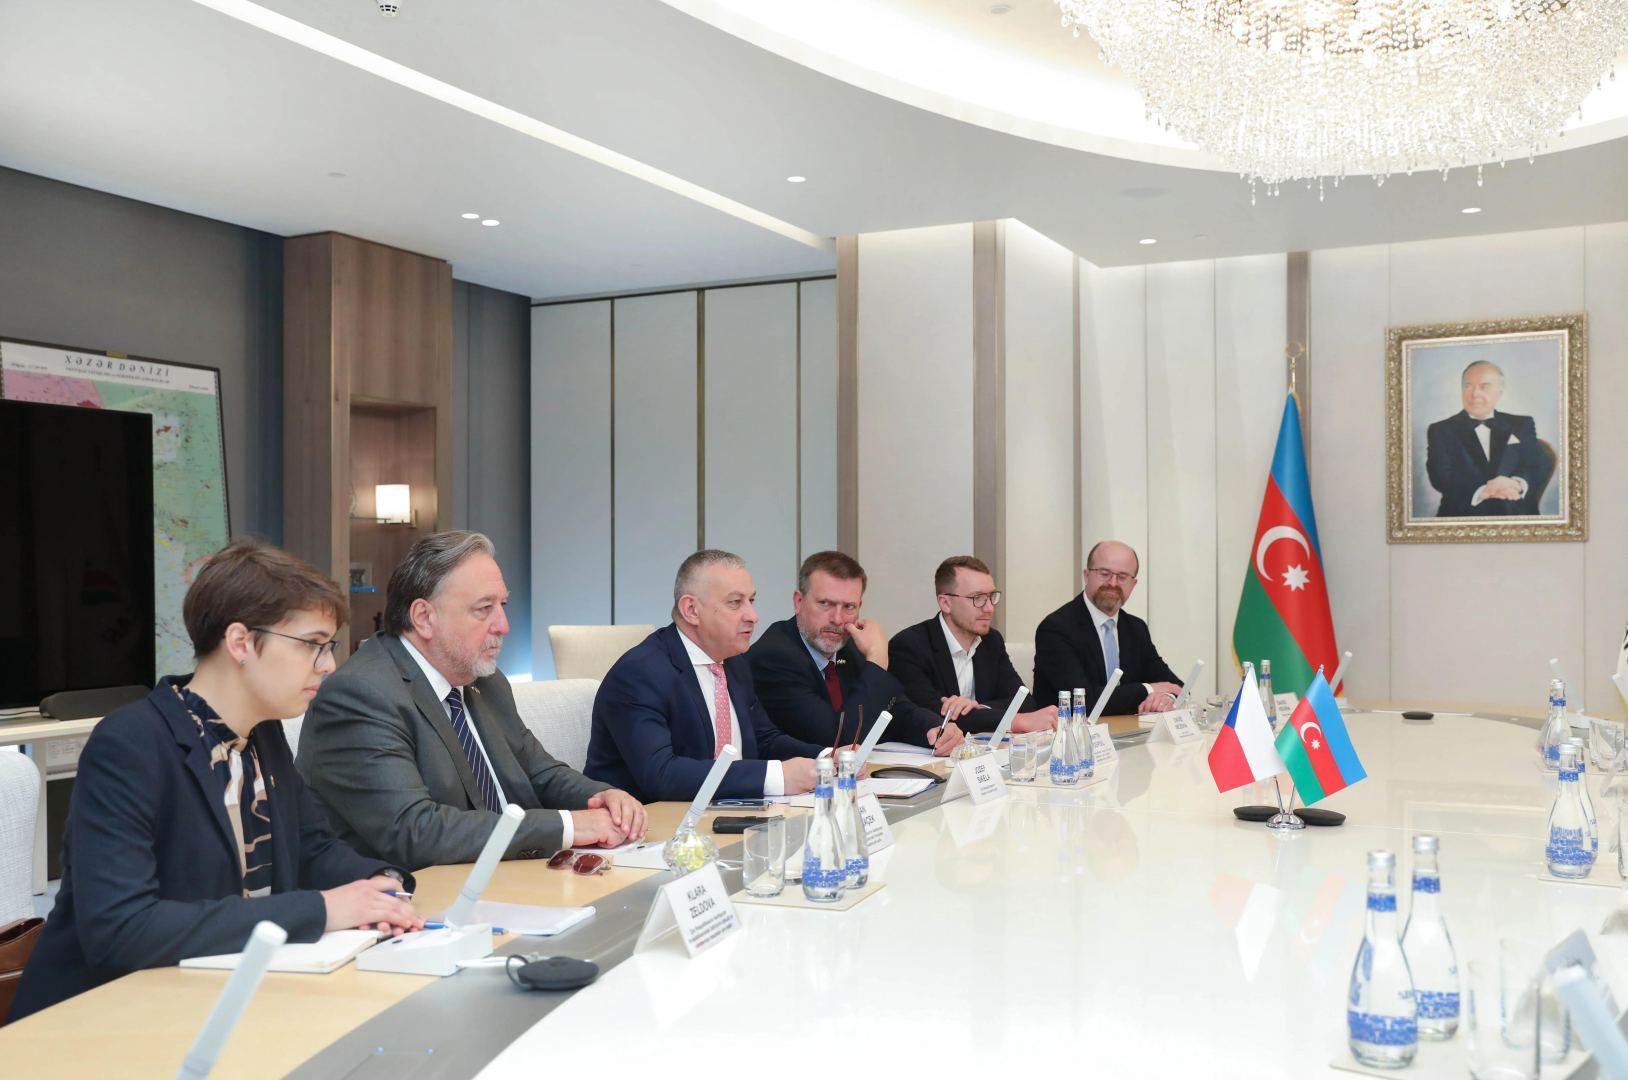 SOCAR President meets Czech Minister of Industry and Trade (PHOTO)